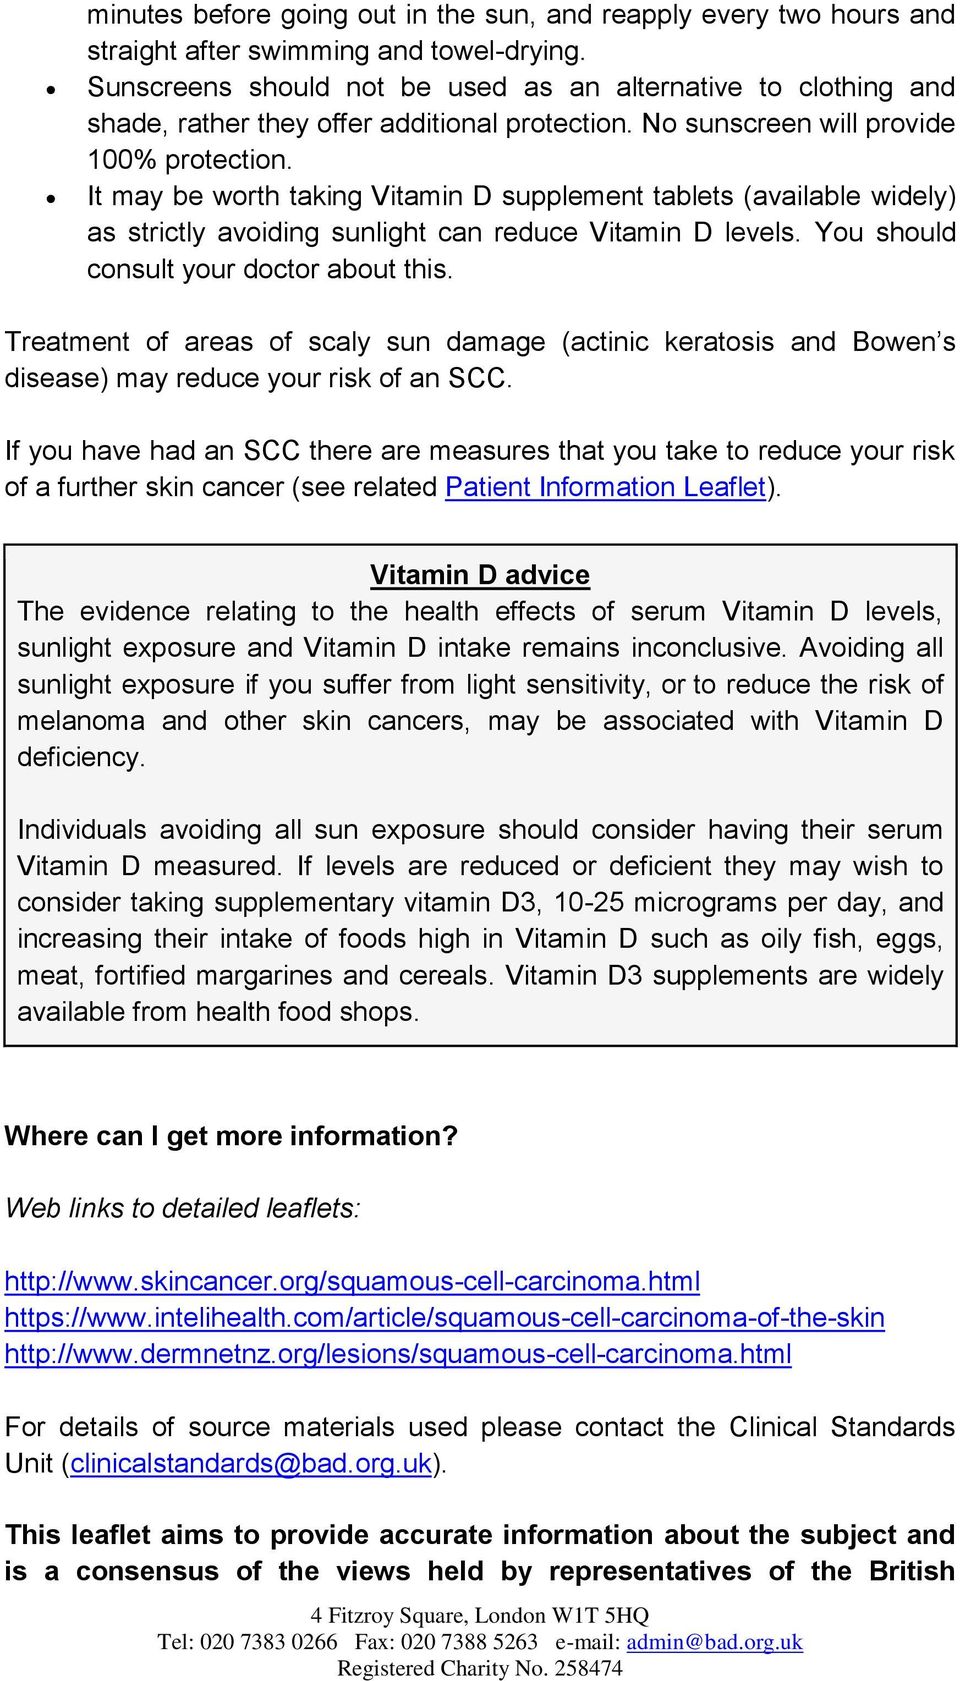 It may be worth taking Vitamin D supplement tablets (available widely) as strictly avoiding sunlight can reduce Vitamin D levels. You should consult your doctor about this.